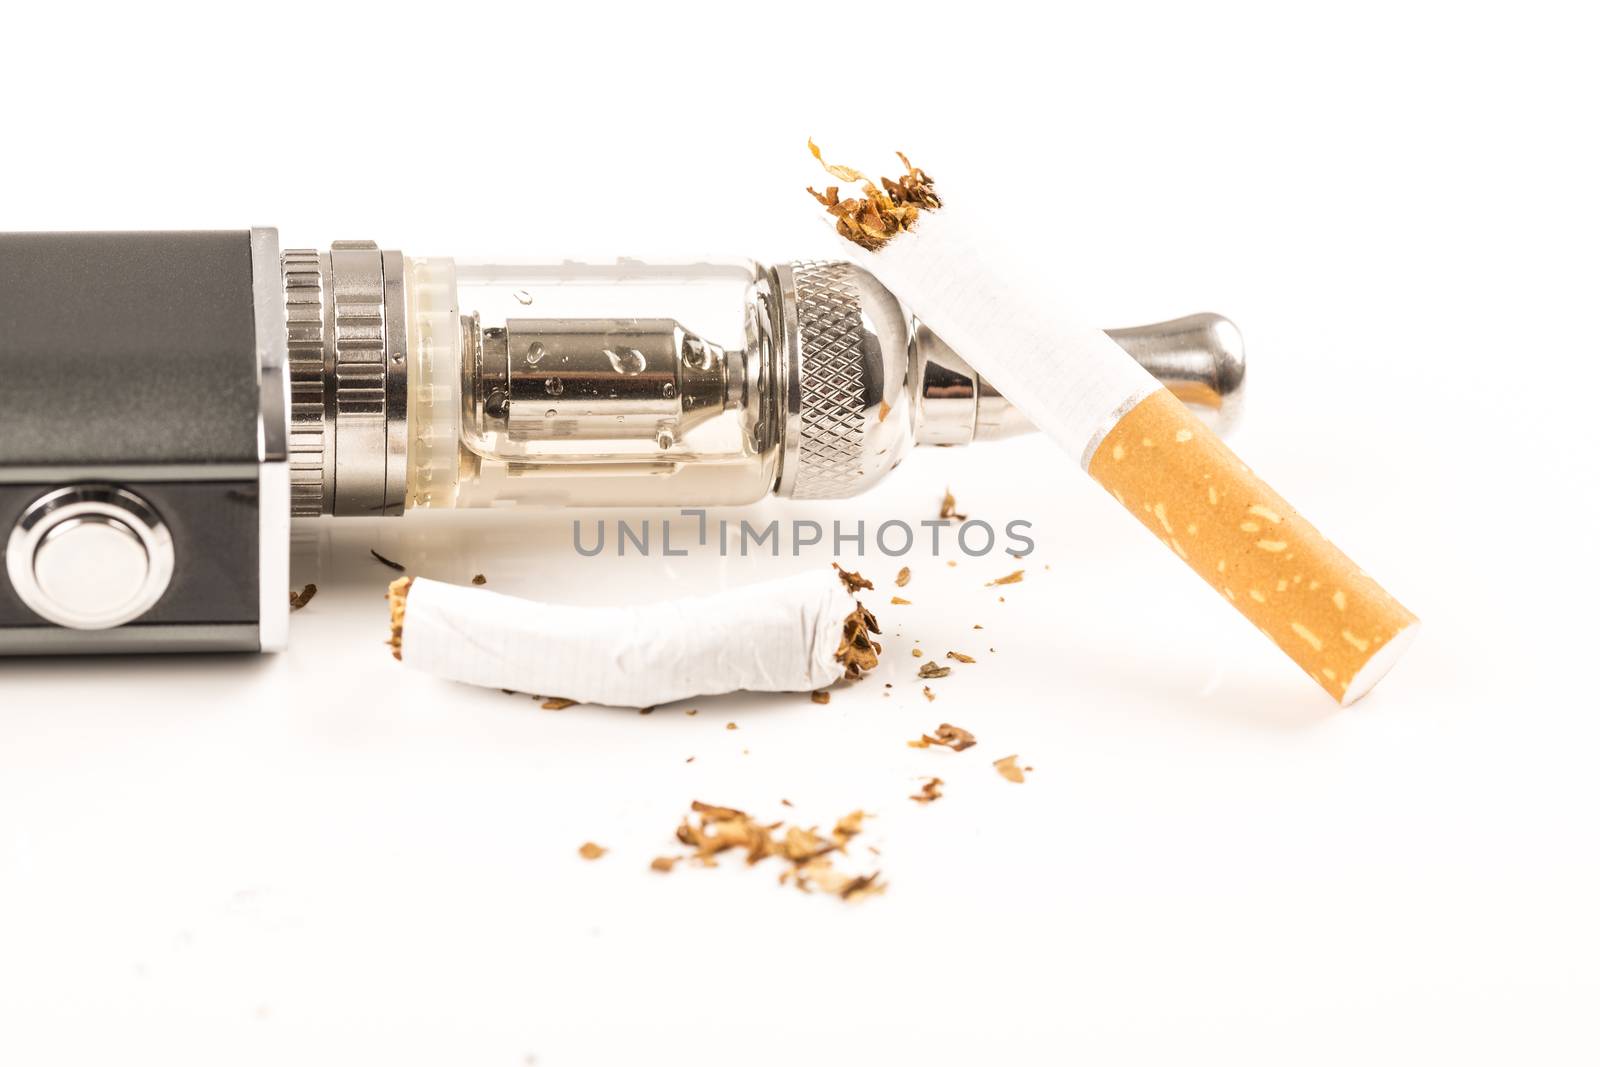 electronic cigarettes and tabacco on white background stop smoking message